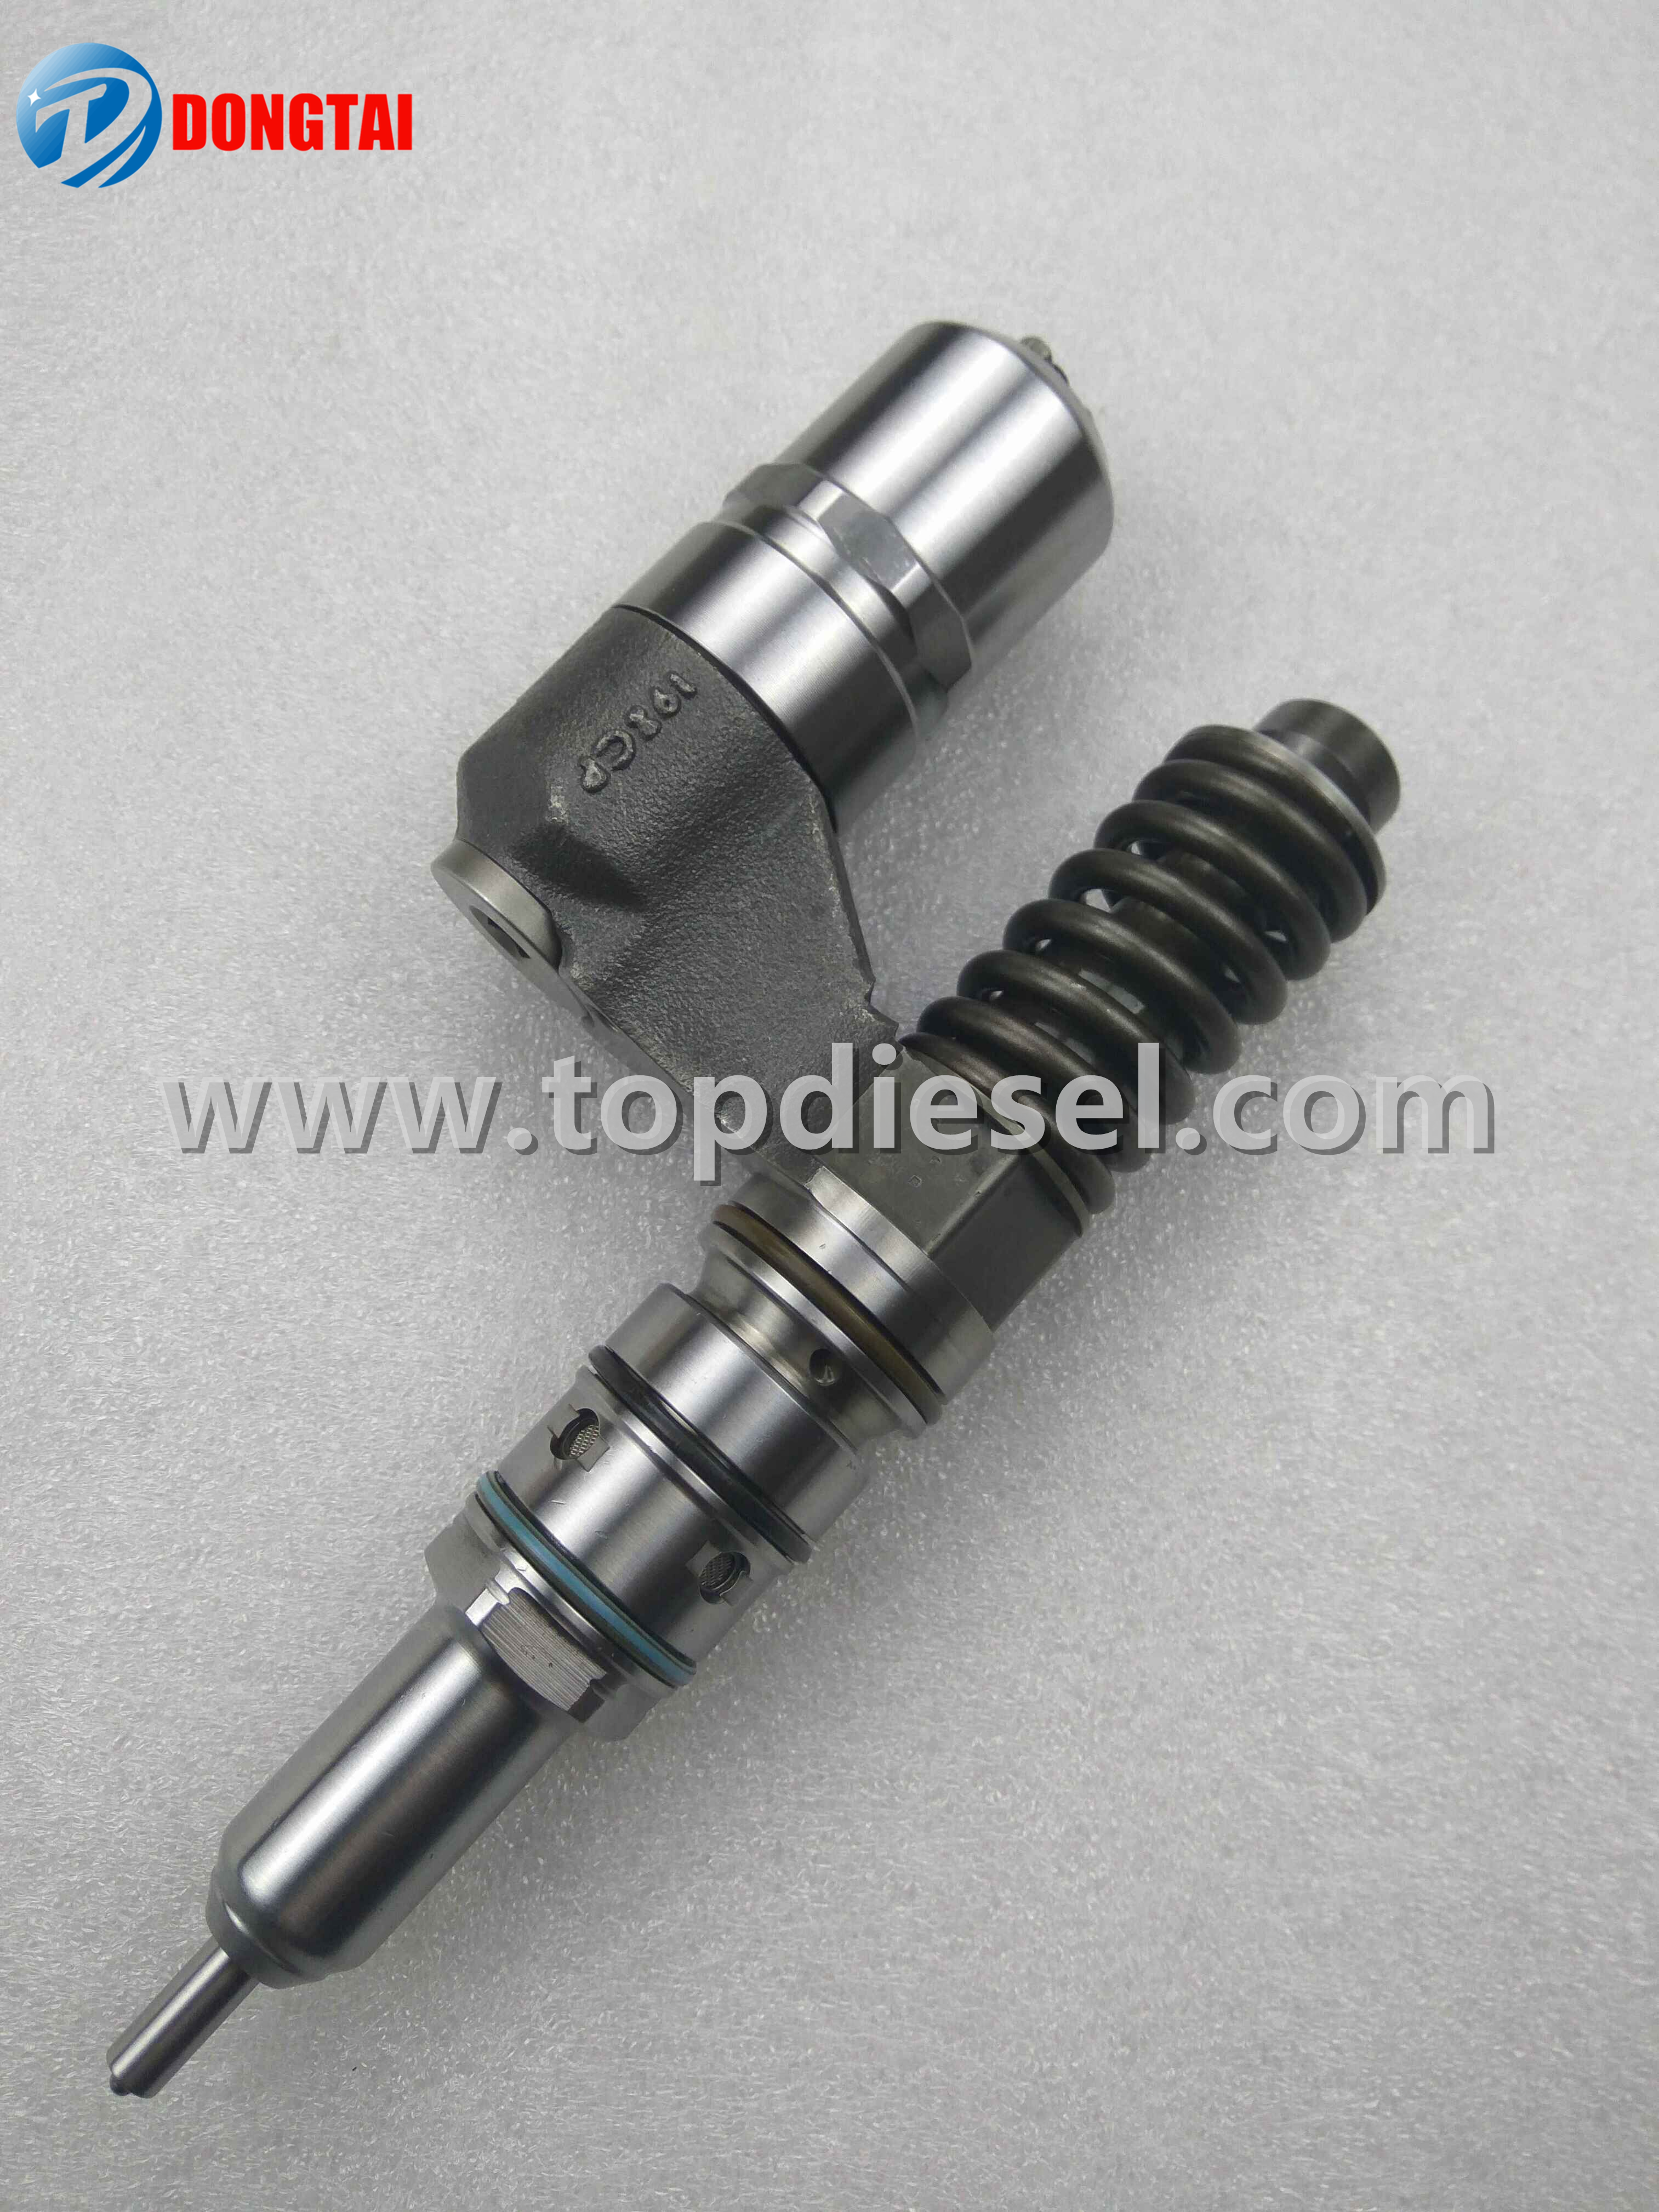 Hot Sale for Denso Valve 090310-0500 - 0414701035 BOSCH INJECTOR  – Dongtai